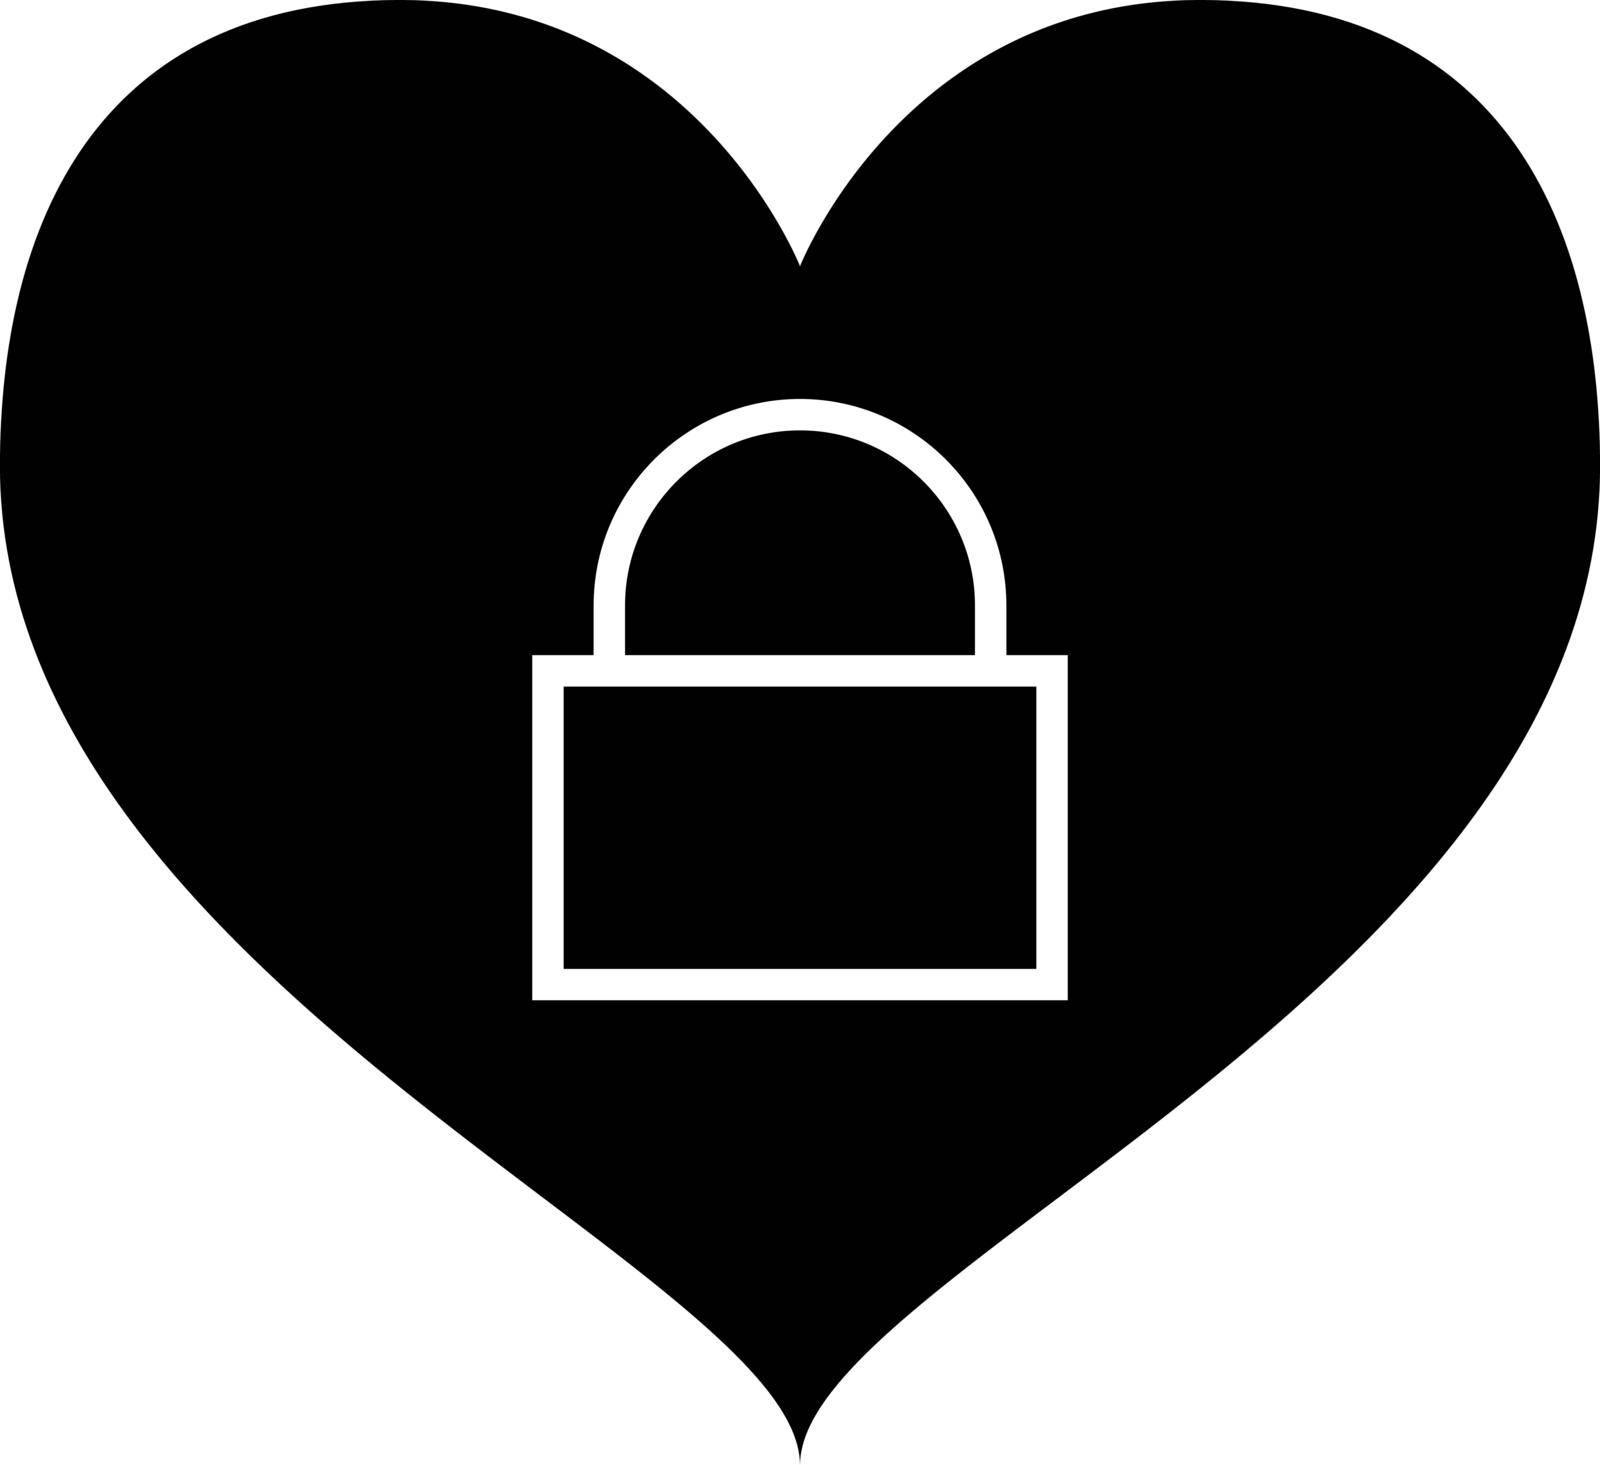 Locked Heart Glyph Icon Vector by abbydesign